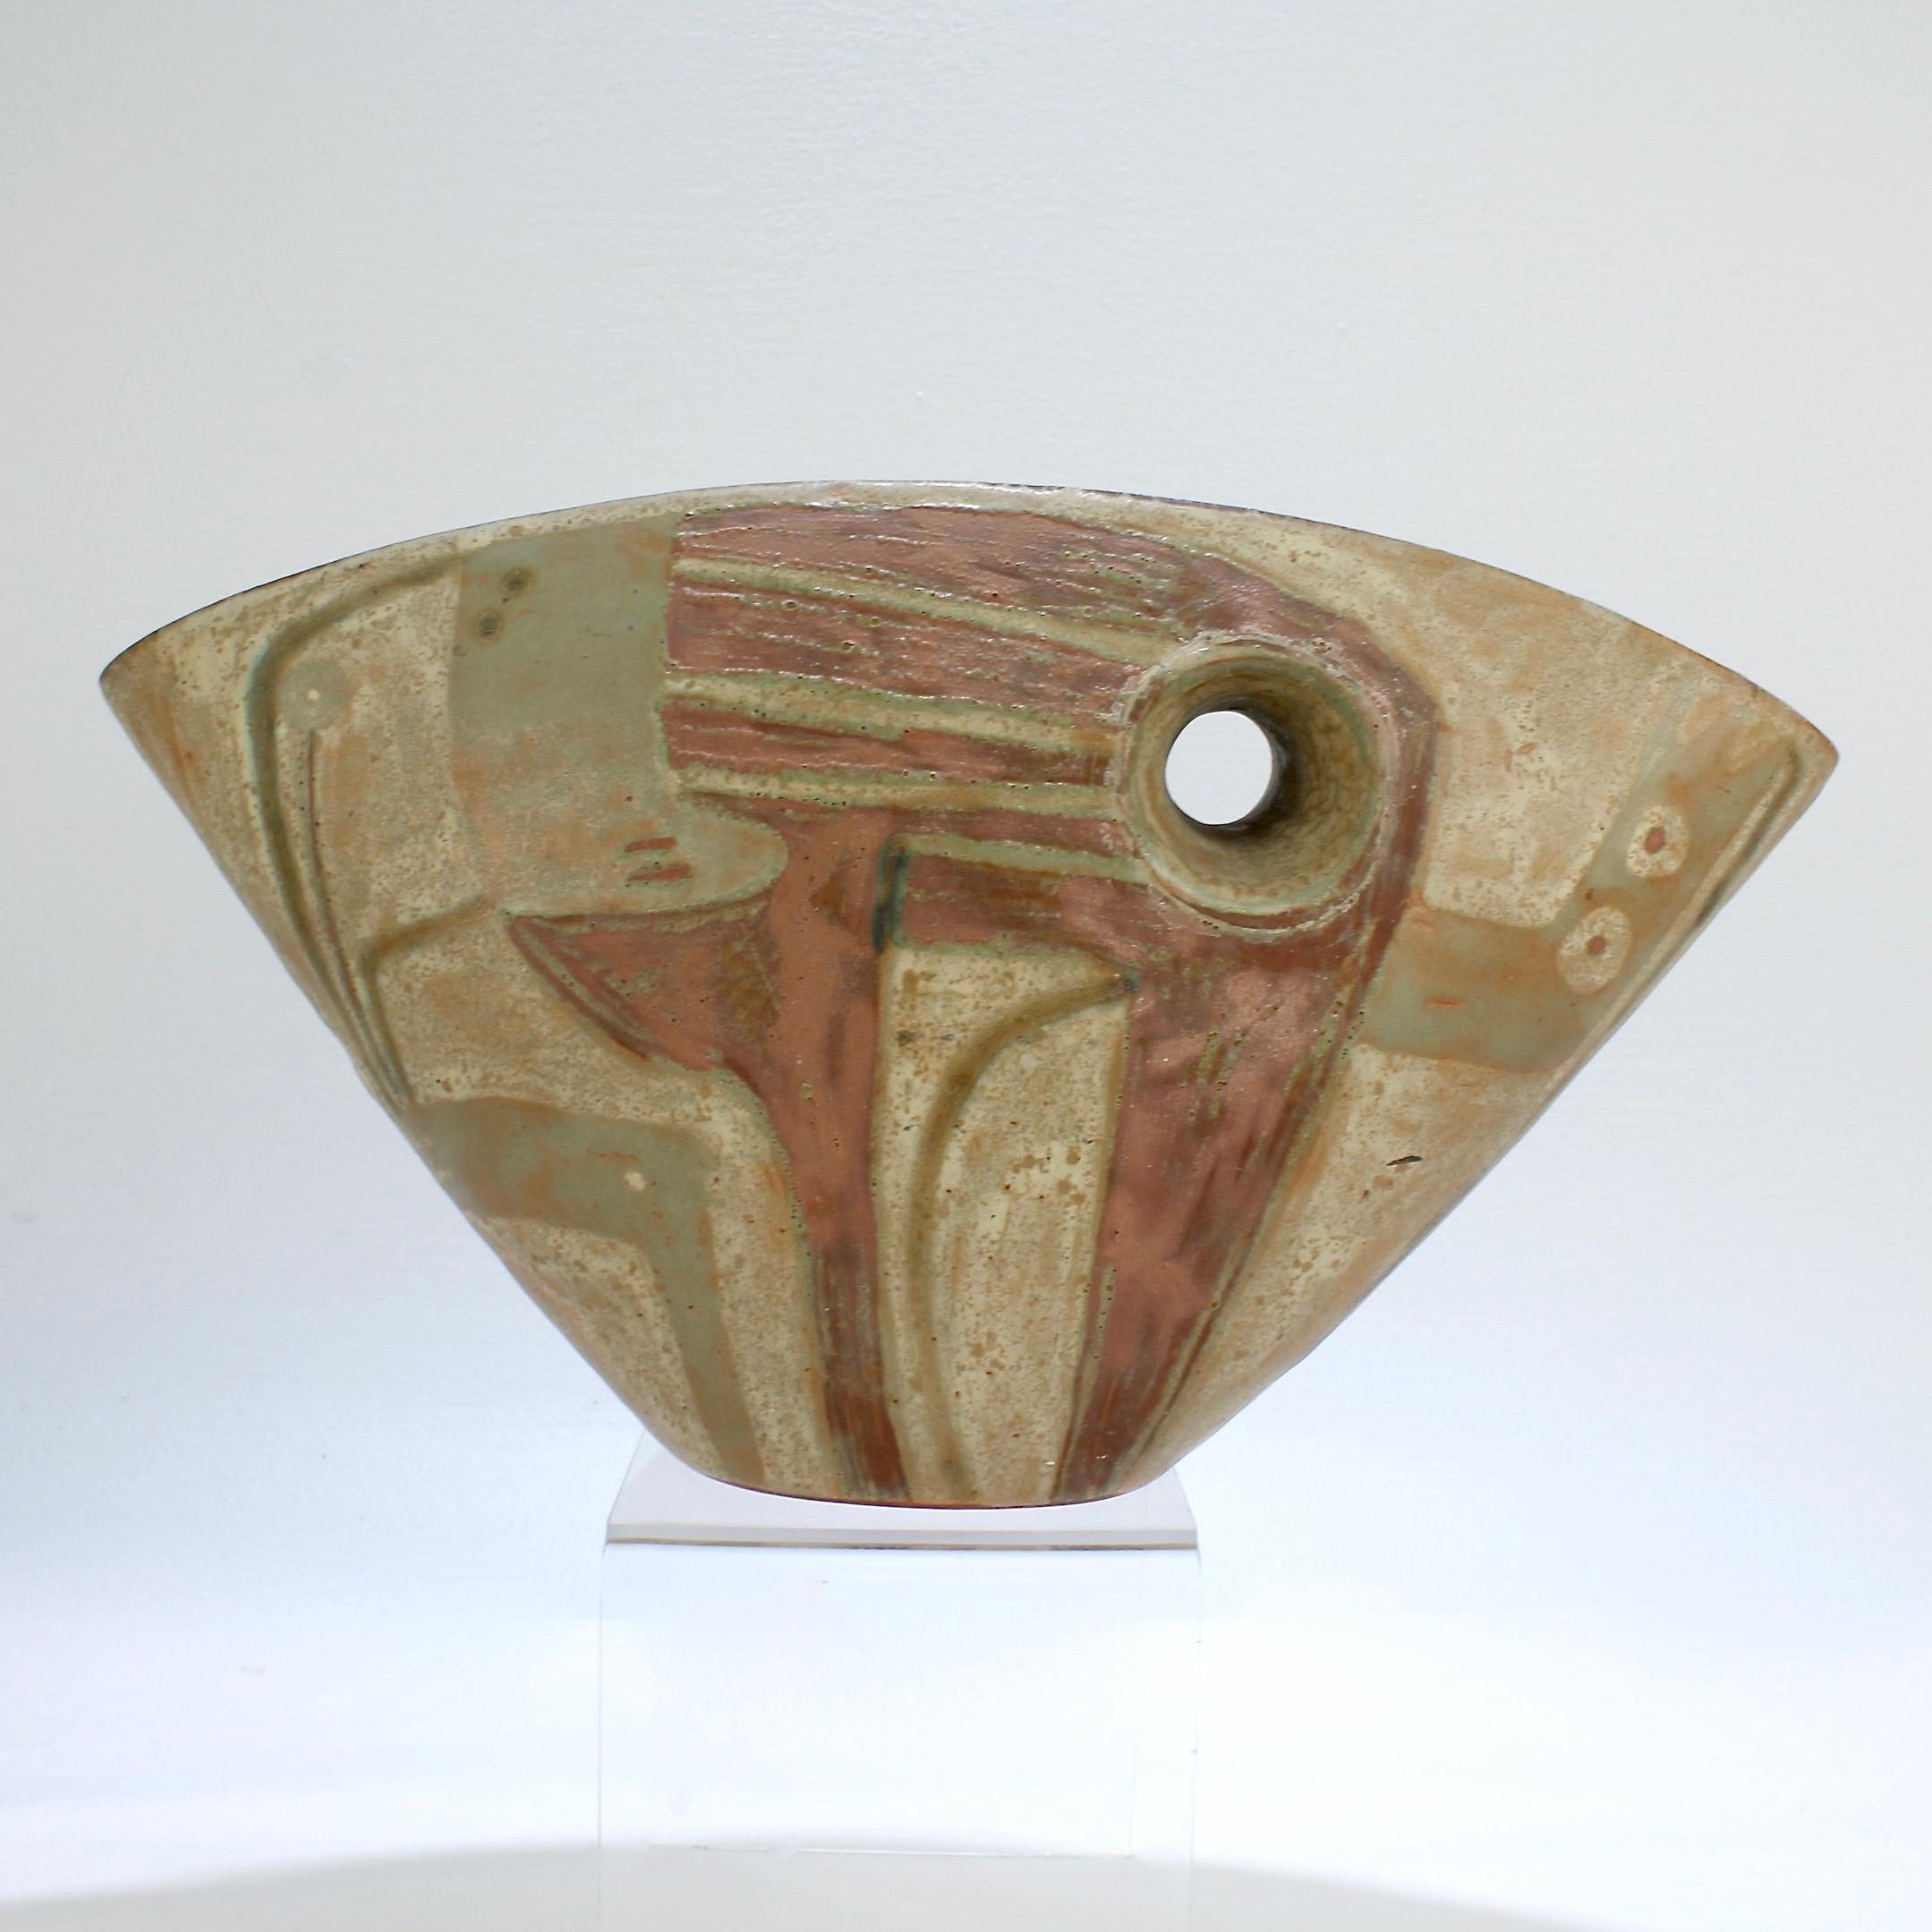 A fine and rare Beate Kuhn vessel.

With a fan shaped body, abstract polychrome decoration to both sides, and a typical cylindrical opening through the center. 

The foot bears a Beate Kuhn spiral studio mark, an old Beate Kuhn Düdelsheim Kreis